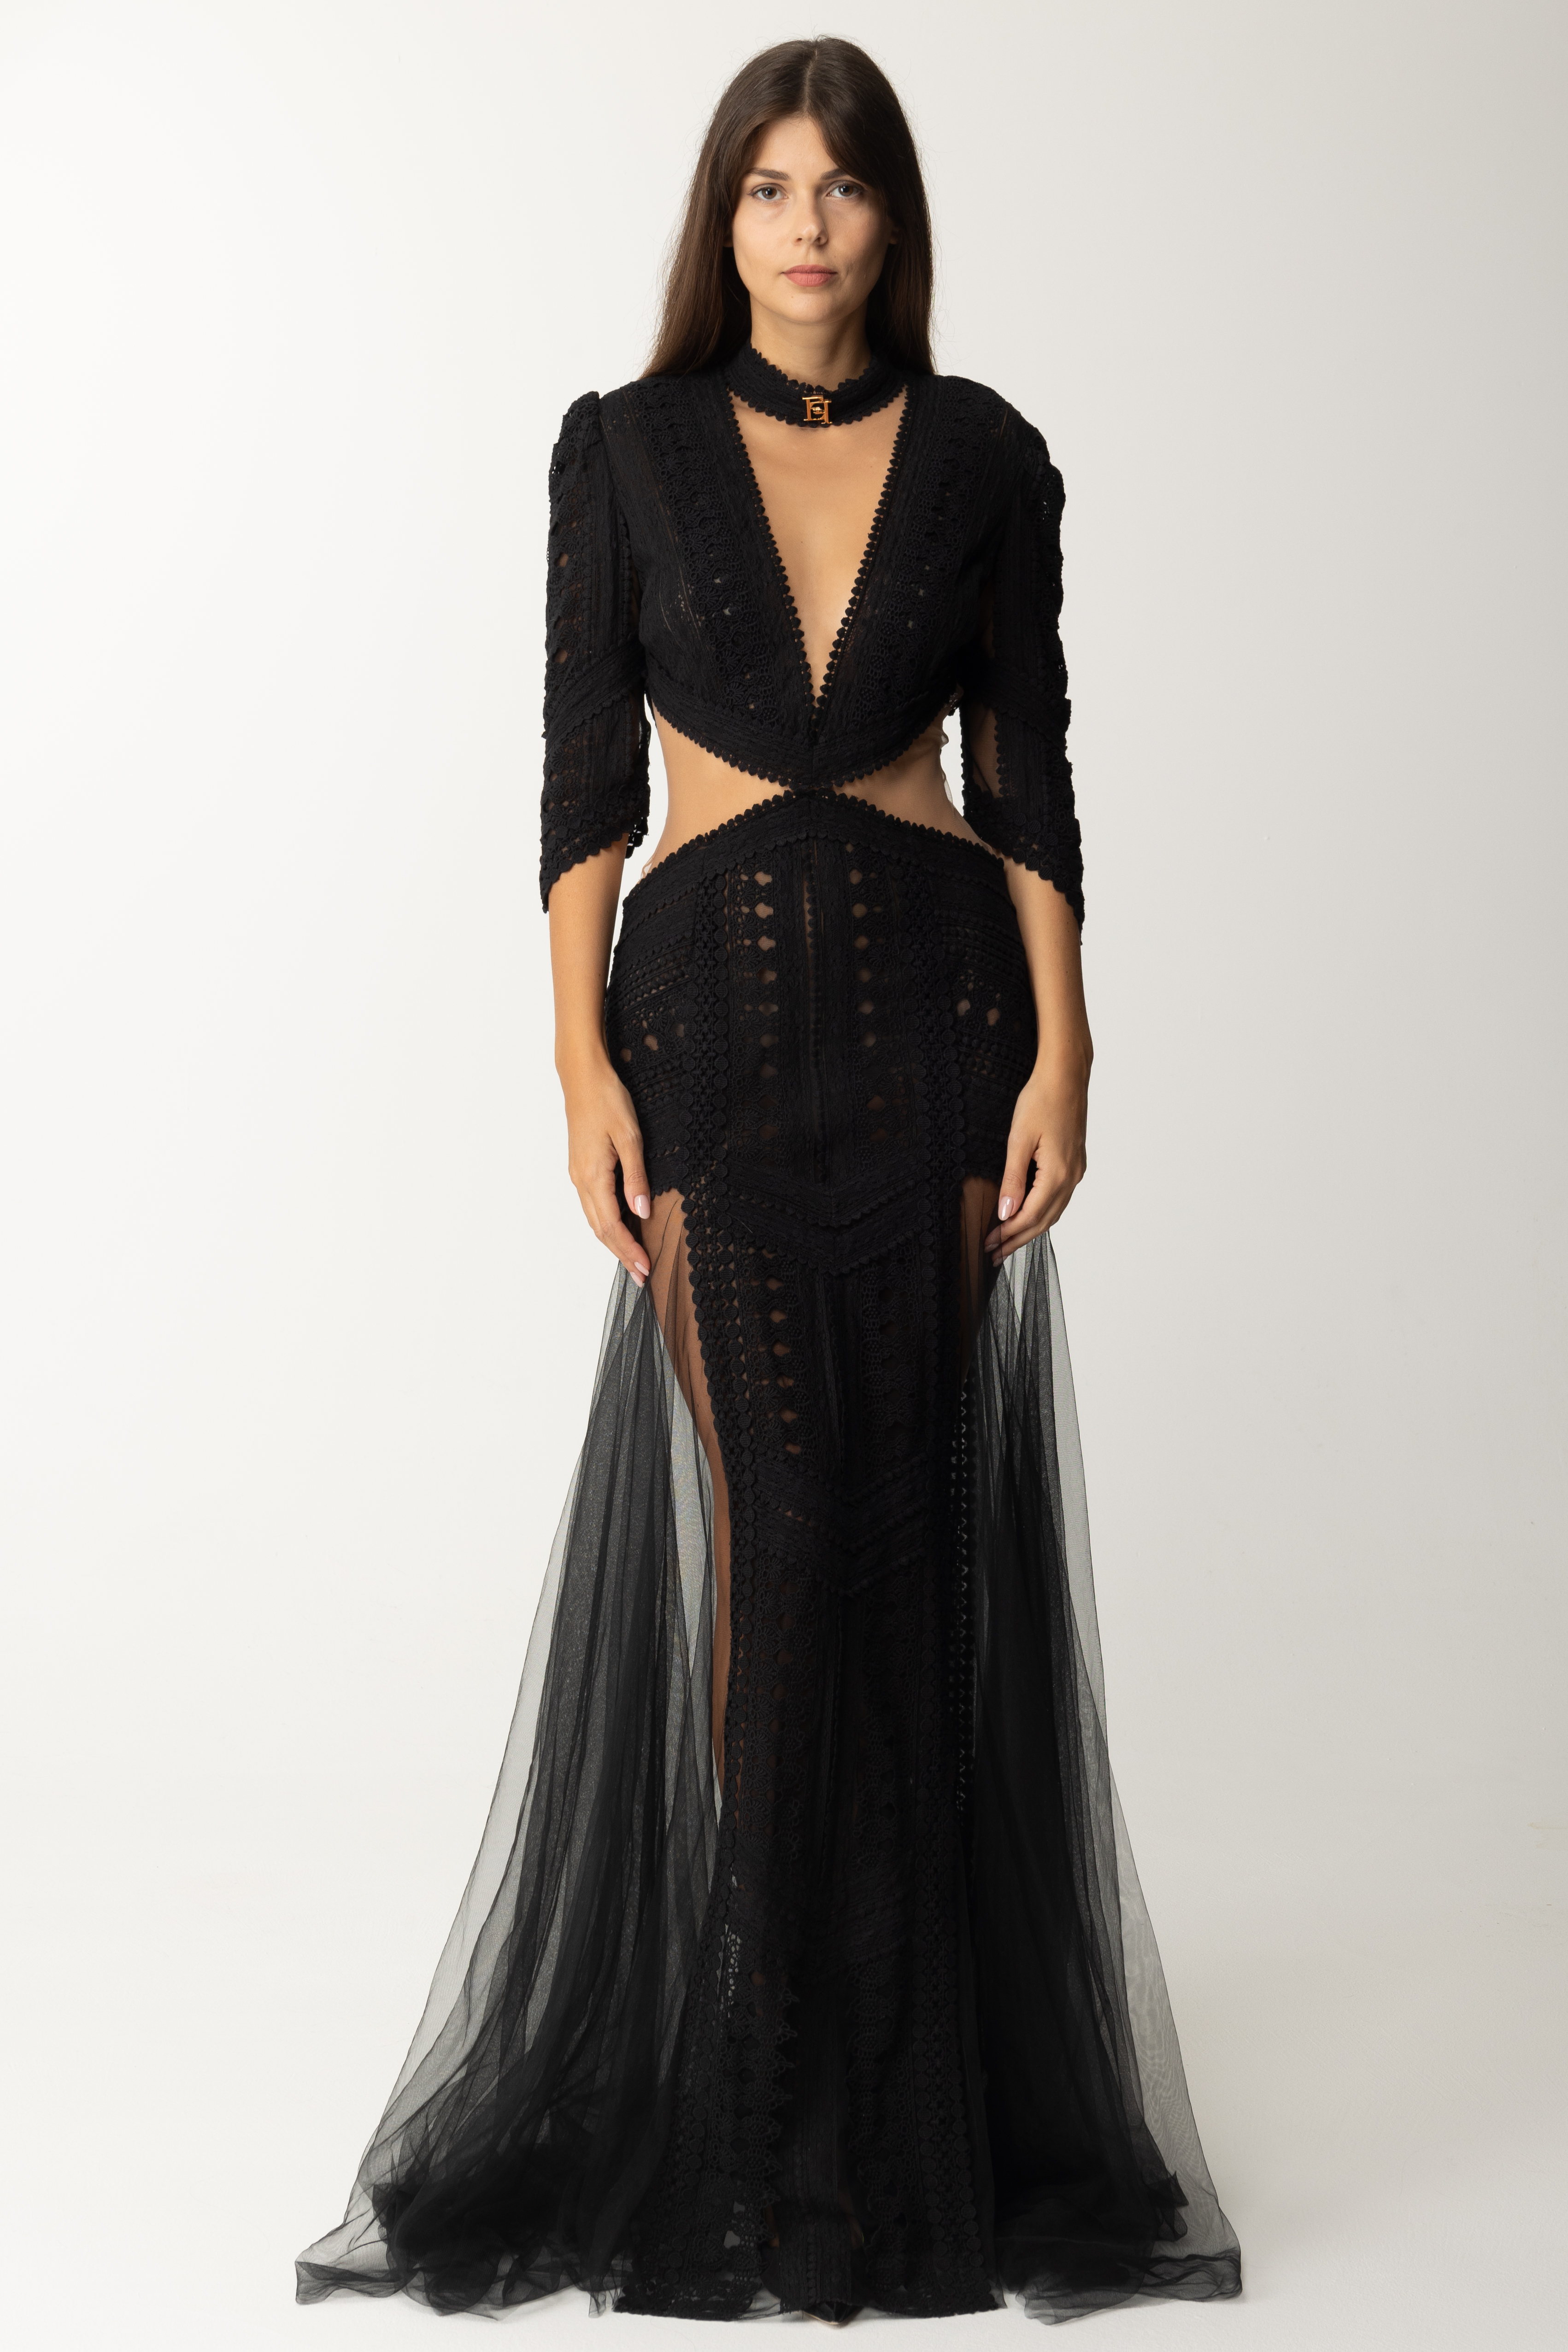 Preview: Elisabetta Franchi Red carpet dress in lace and tulle Nero